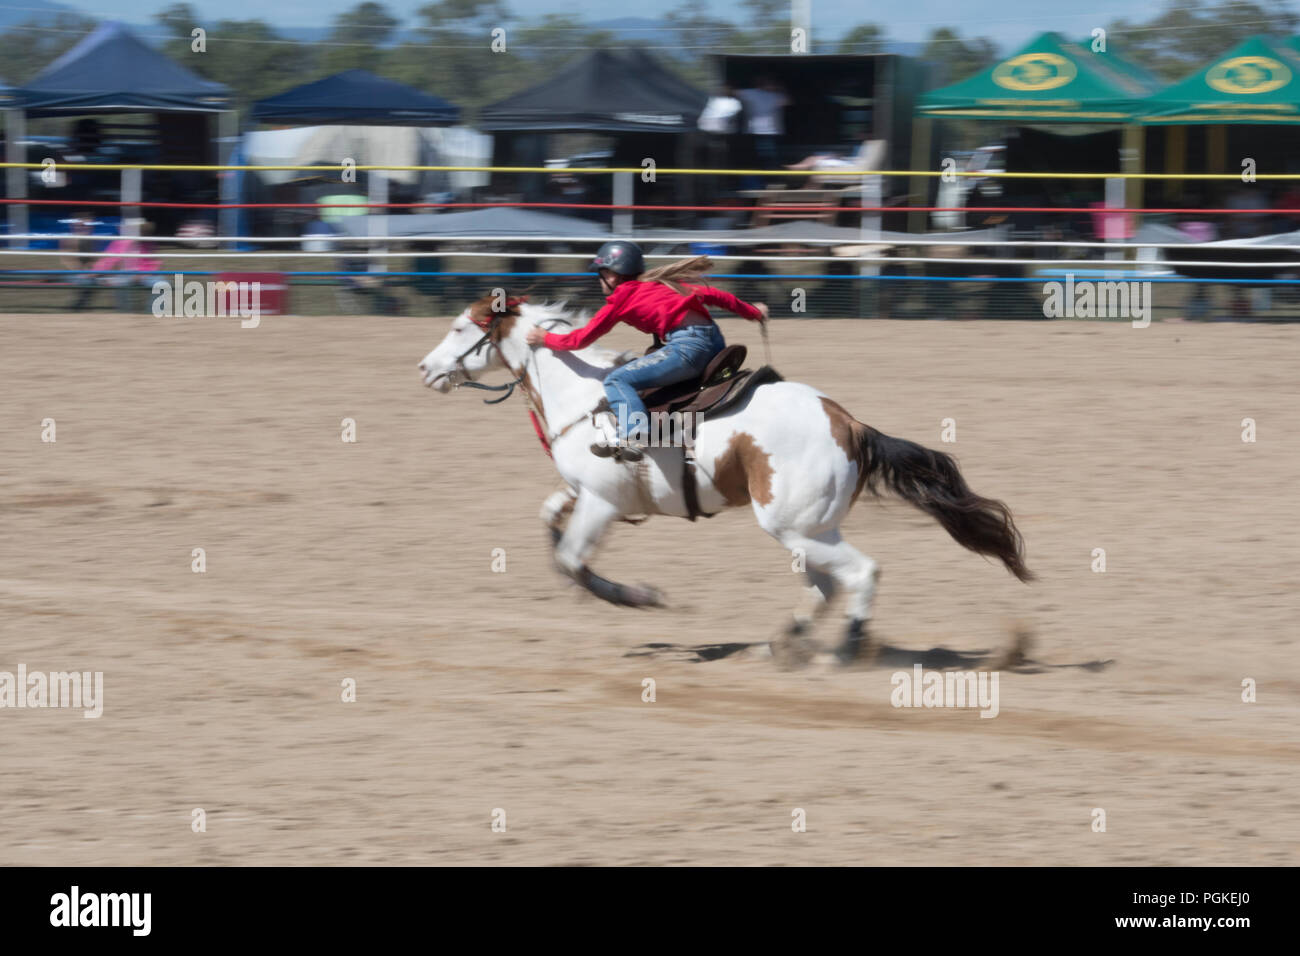 Woman rider competing in the barrel race at Mareeba rodeo, Far North Queensland, FNQ, QLD, Australia Stock Photo